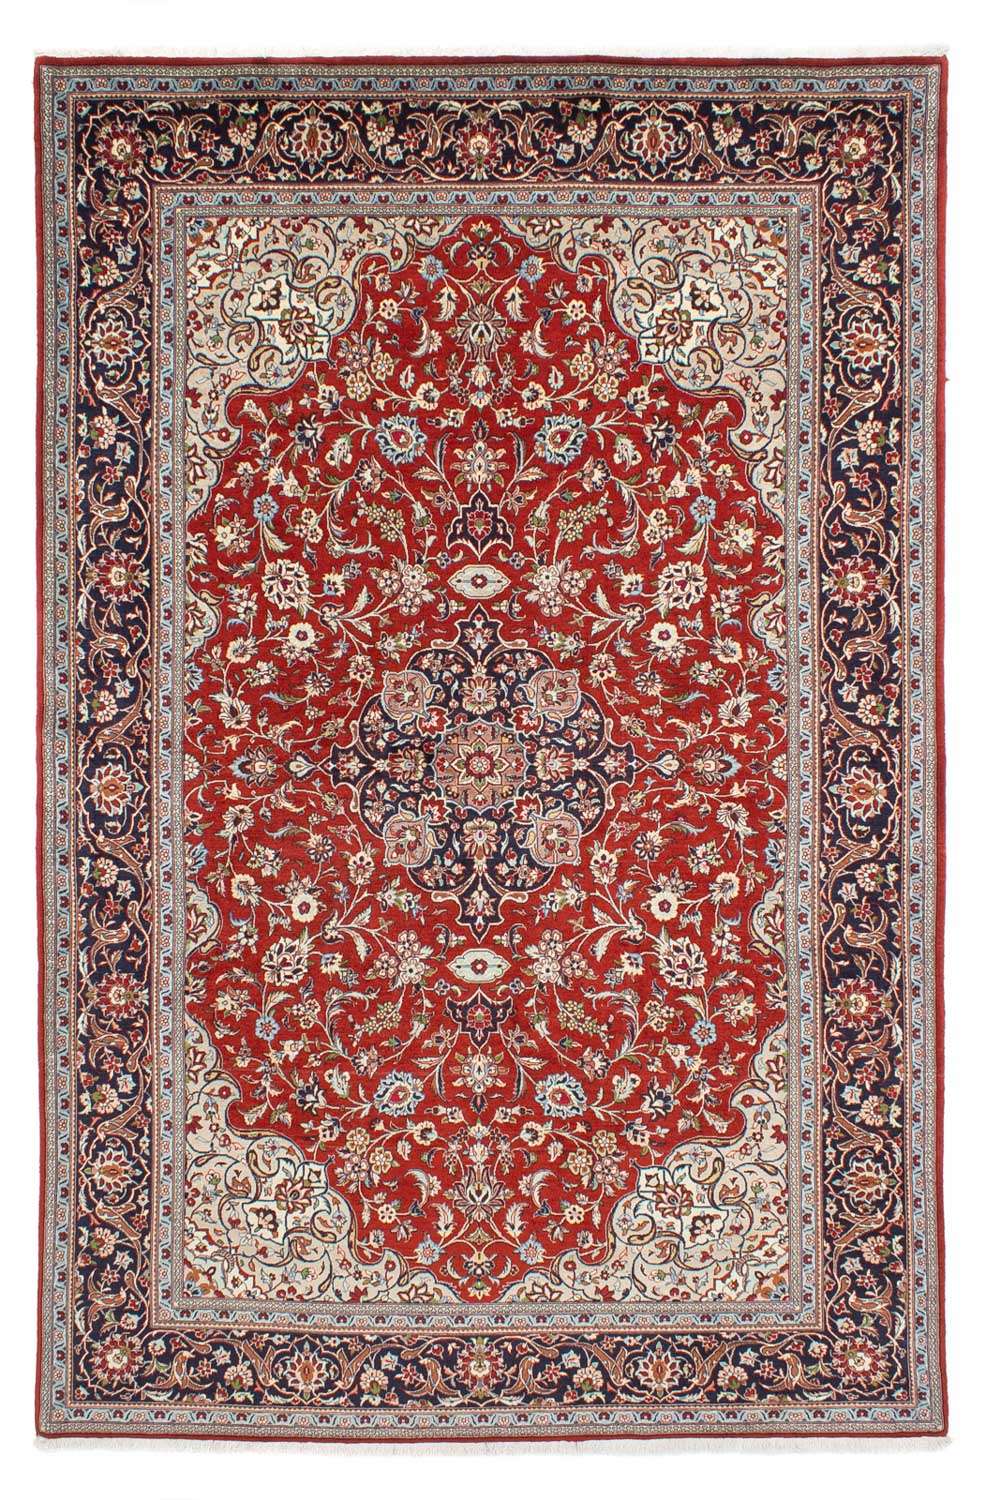 Perser Rug - Classic - 309 x 205 cm - red